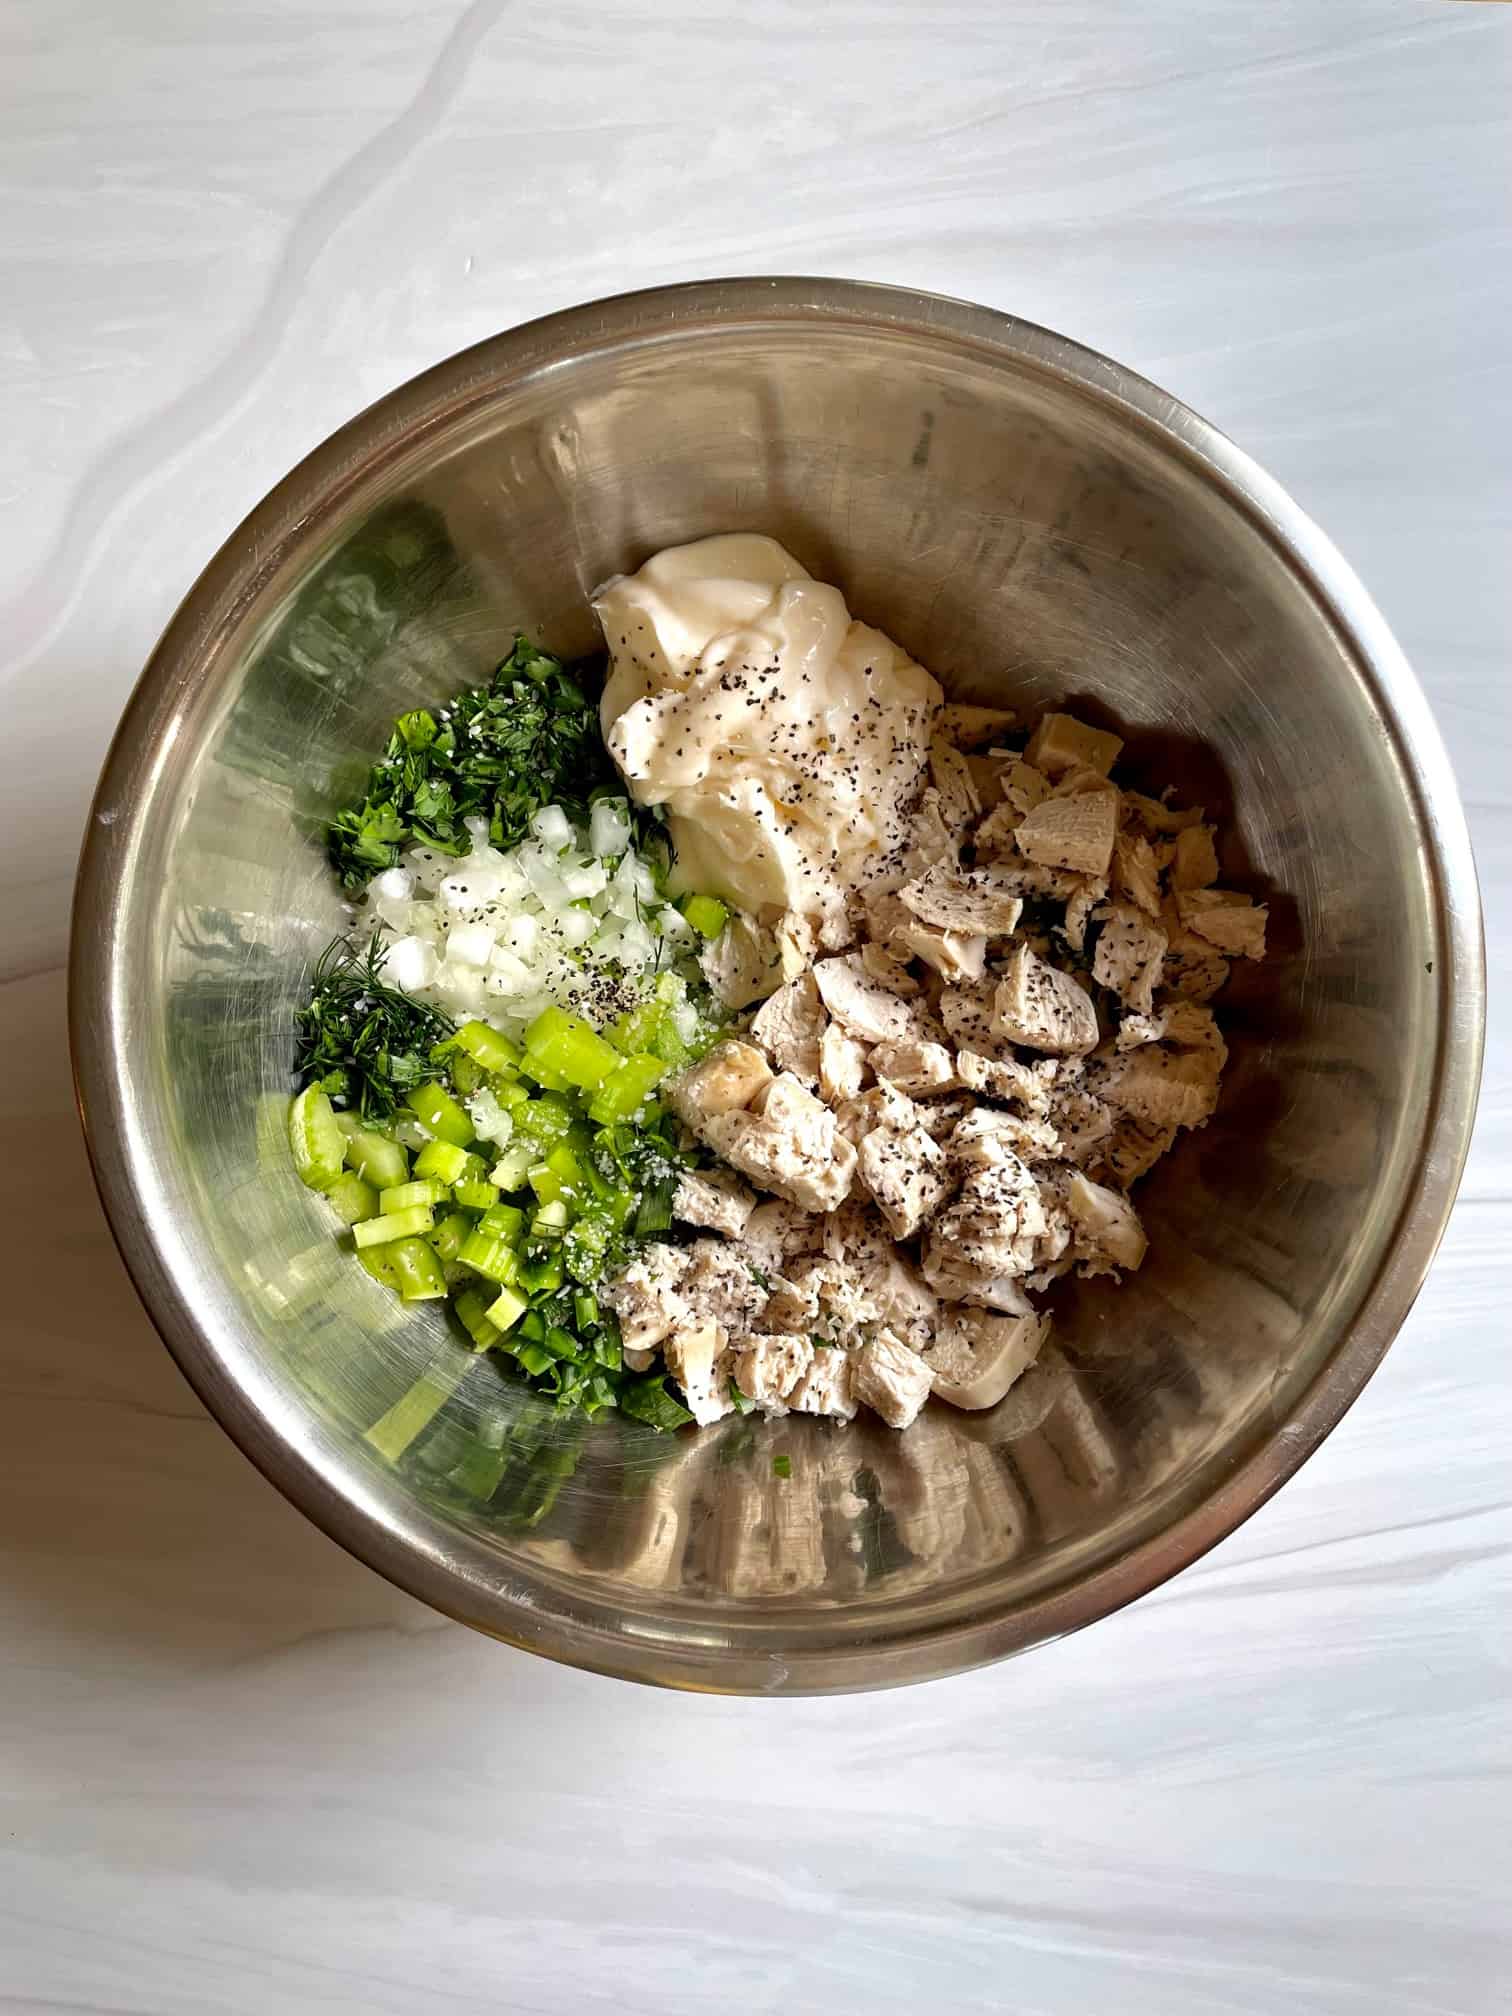 Chicken salad ingredients chopped and in a bowl ready to mix. 